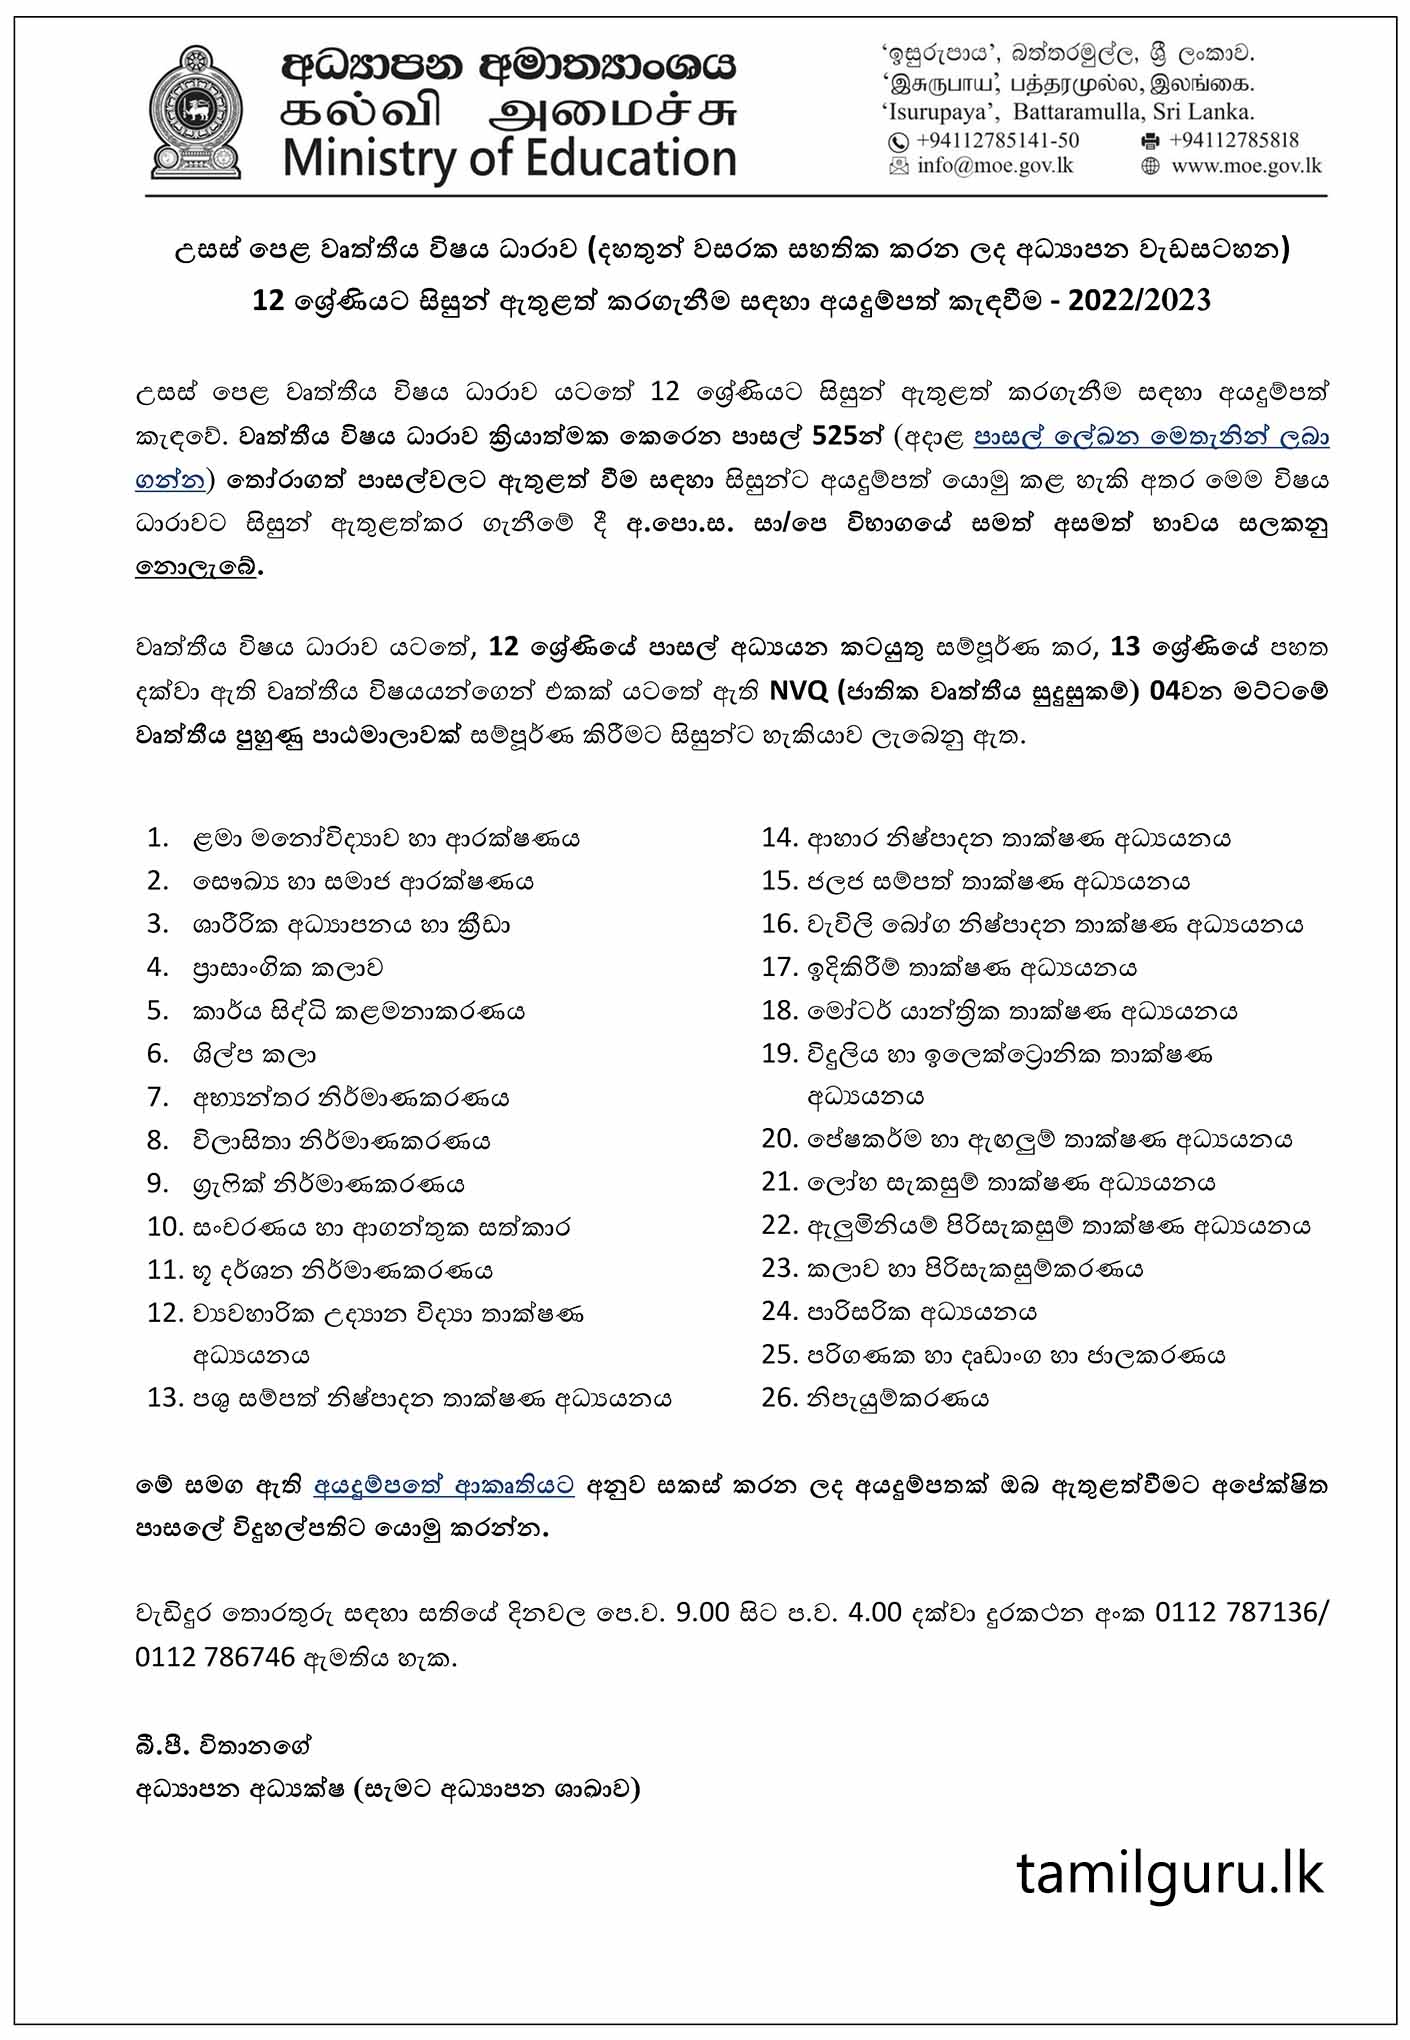 Calling Applications for Admission to Grade 12 - GCE A/L Vocational Stream (Thirteen Years Guaranteed Education Programm) 2022/2023 - Ministry of Education, Sri Lanka